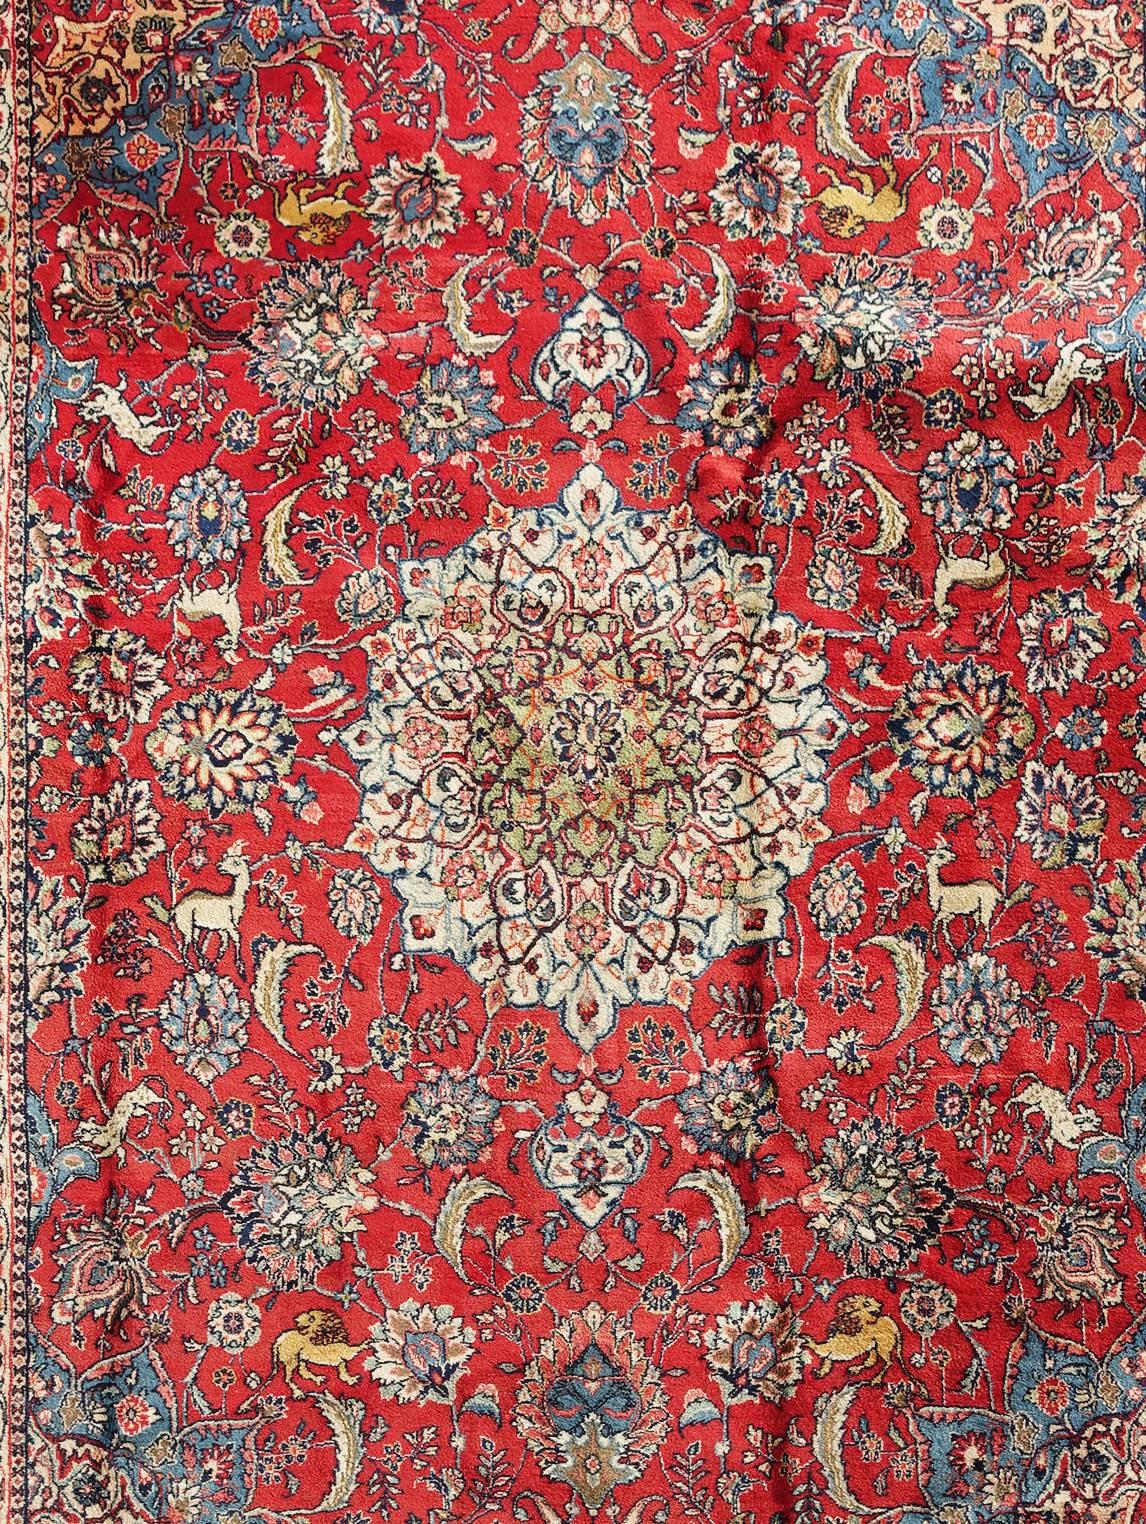 This modern (circa 1970) hand-knotted Persian Sarouq was bought and imported to Europe from an American collector. It is the finest example of carpet artistry tradition dating back several hundreds of years. The bold colors and the symbolic display